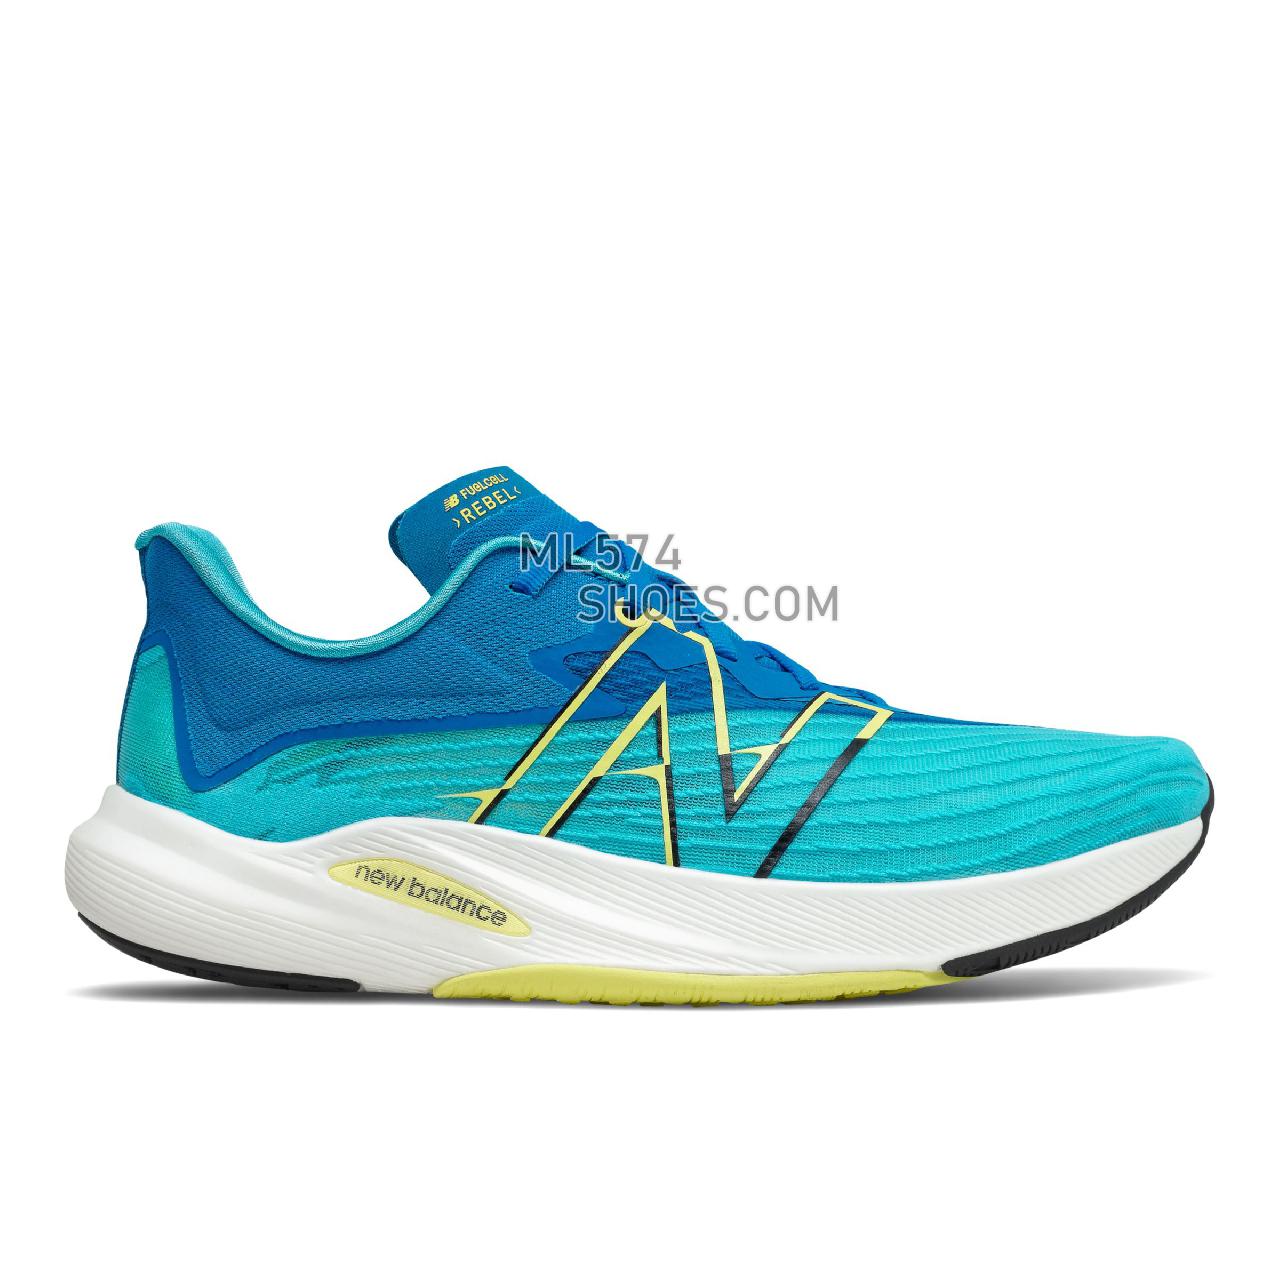 New Balance FuelCell Rebel v2 - Men's Fuelcell Sleek And LightWeight - Virtual Sky with Wave and First Light - MFCXLB2